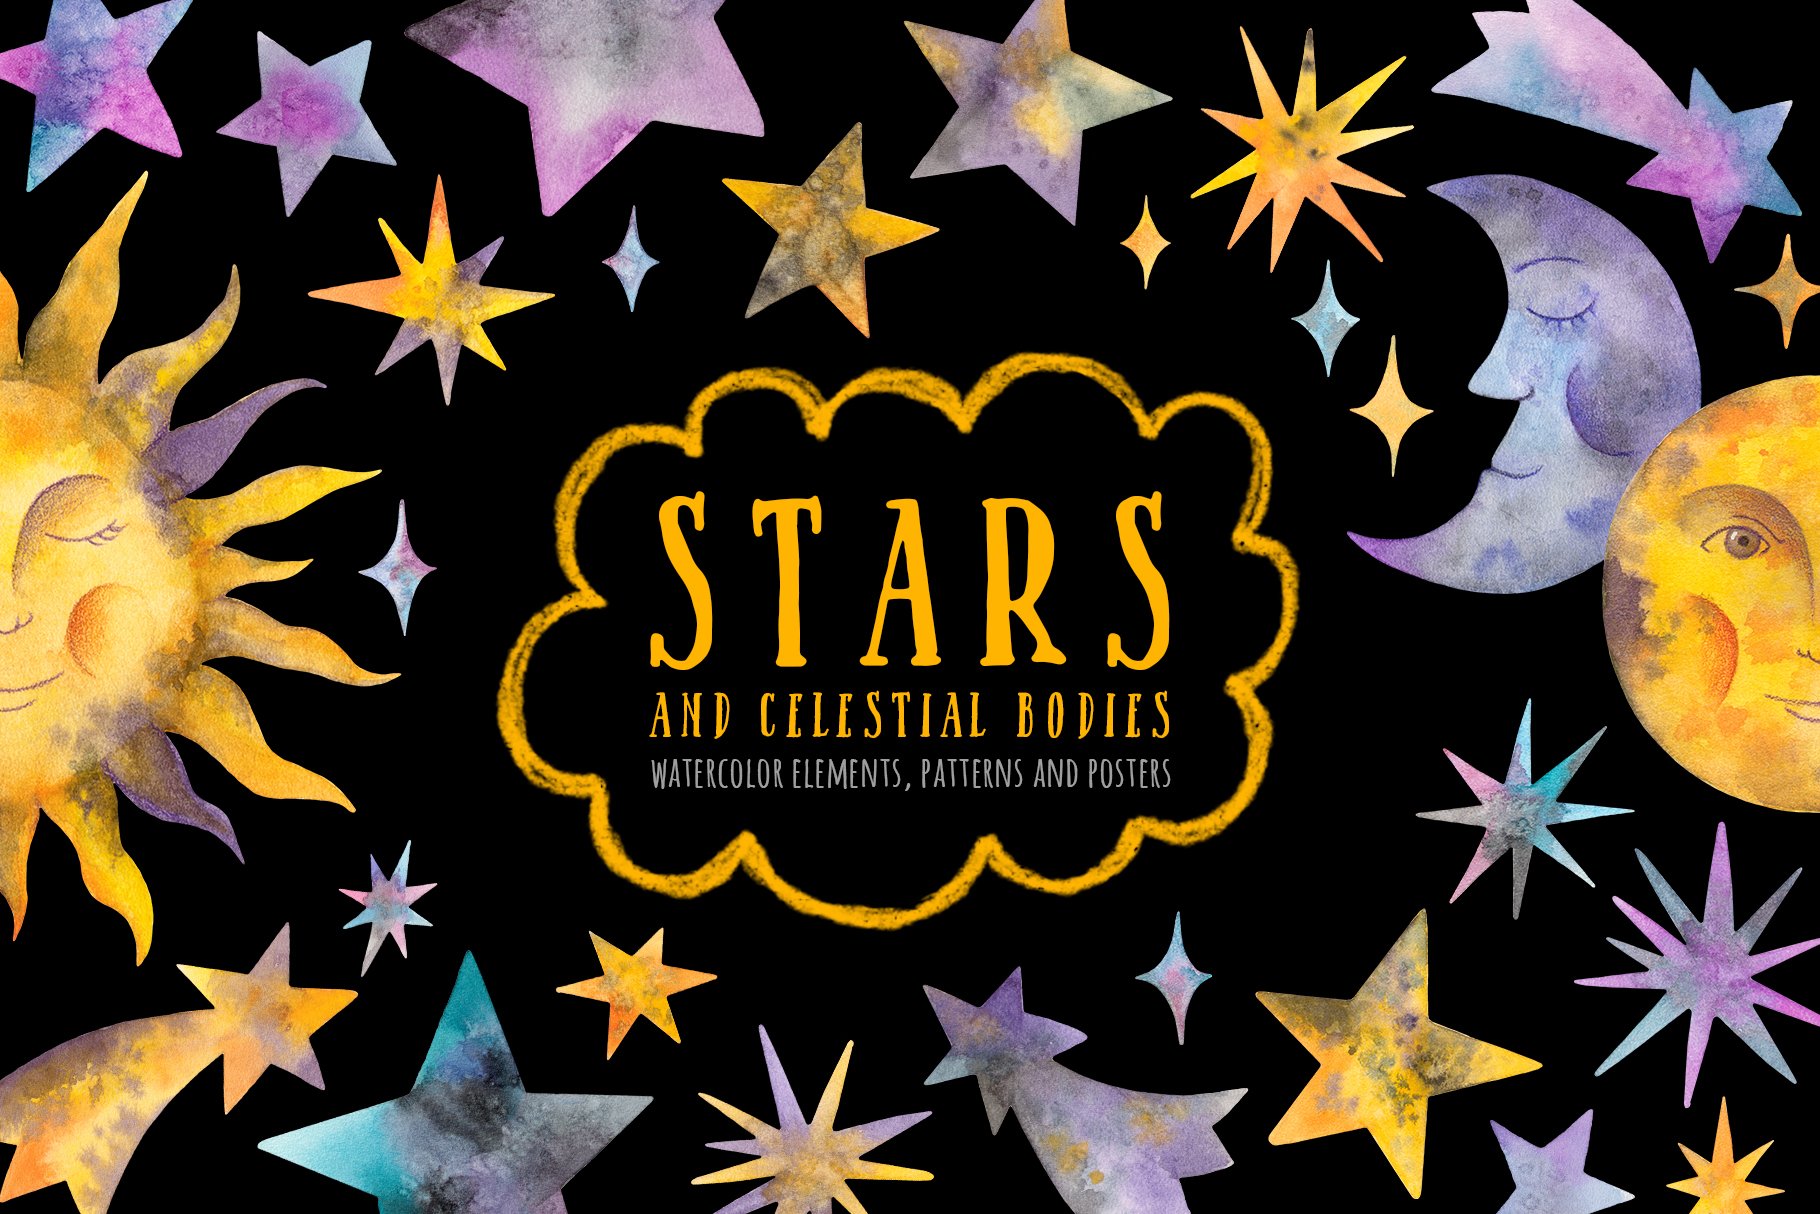 Watercolor Stars & Celestial Bodies cover image.